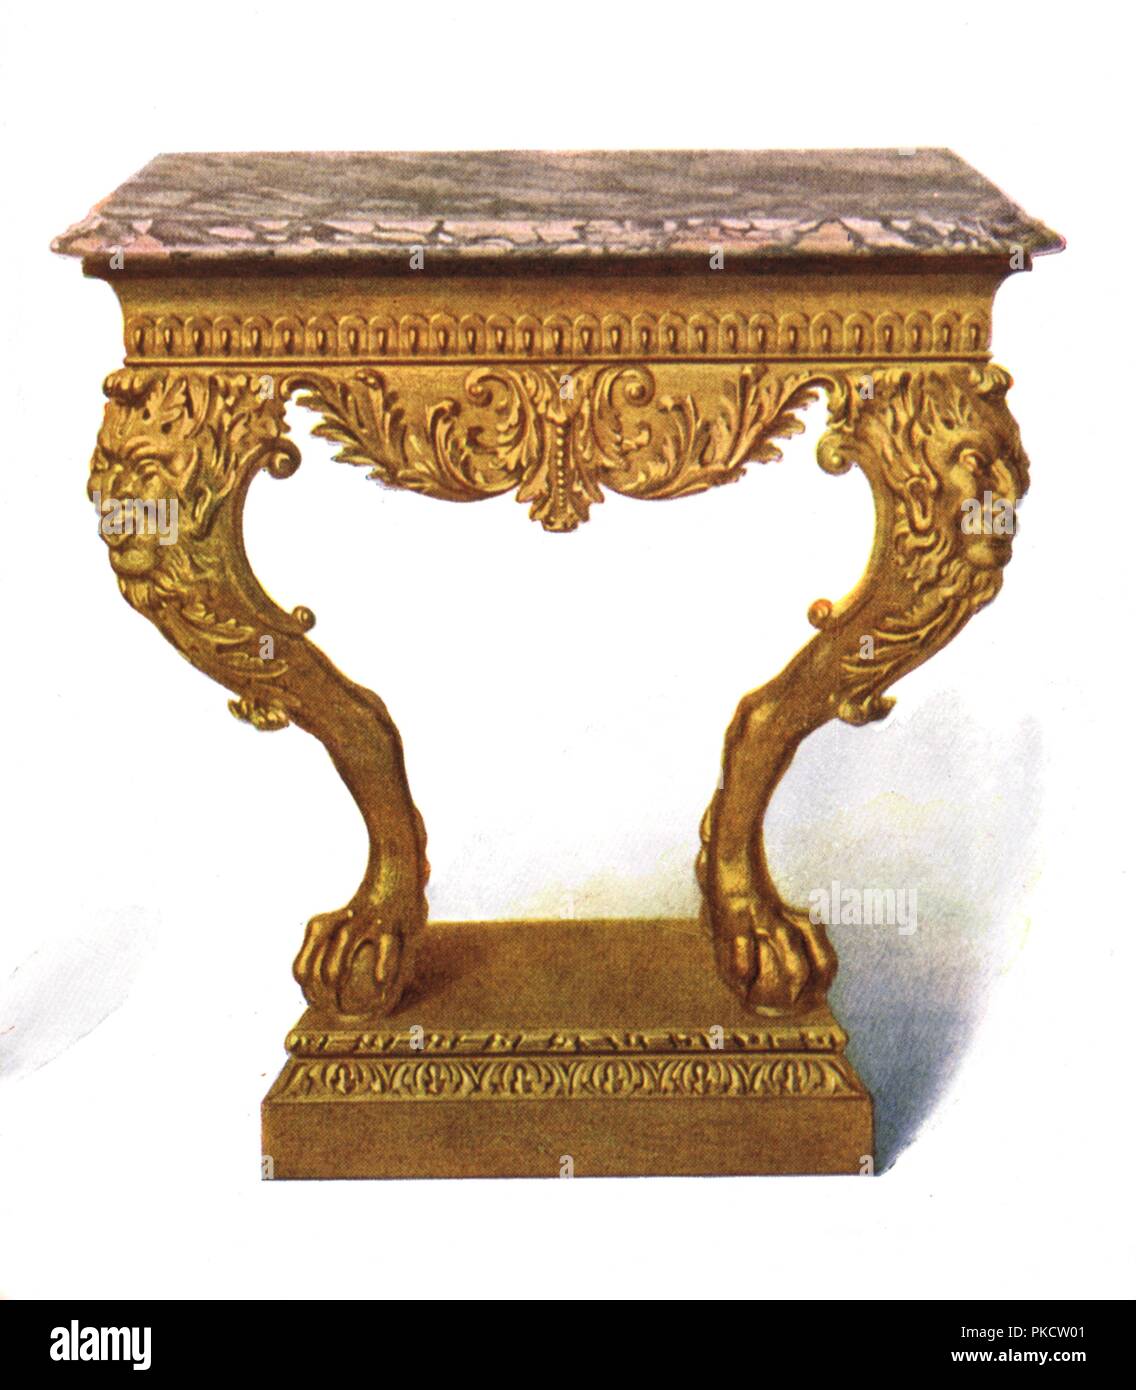 Table-console Doré, 1906. Artiste : Shirley Slocombe. Banque D'Images